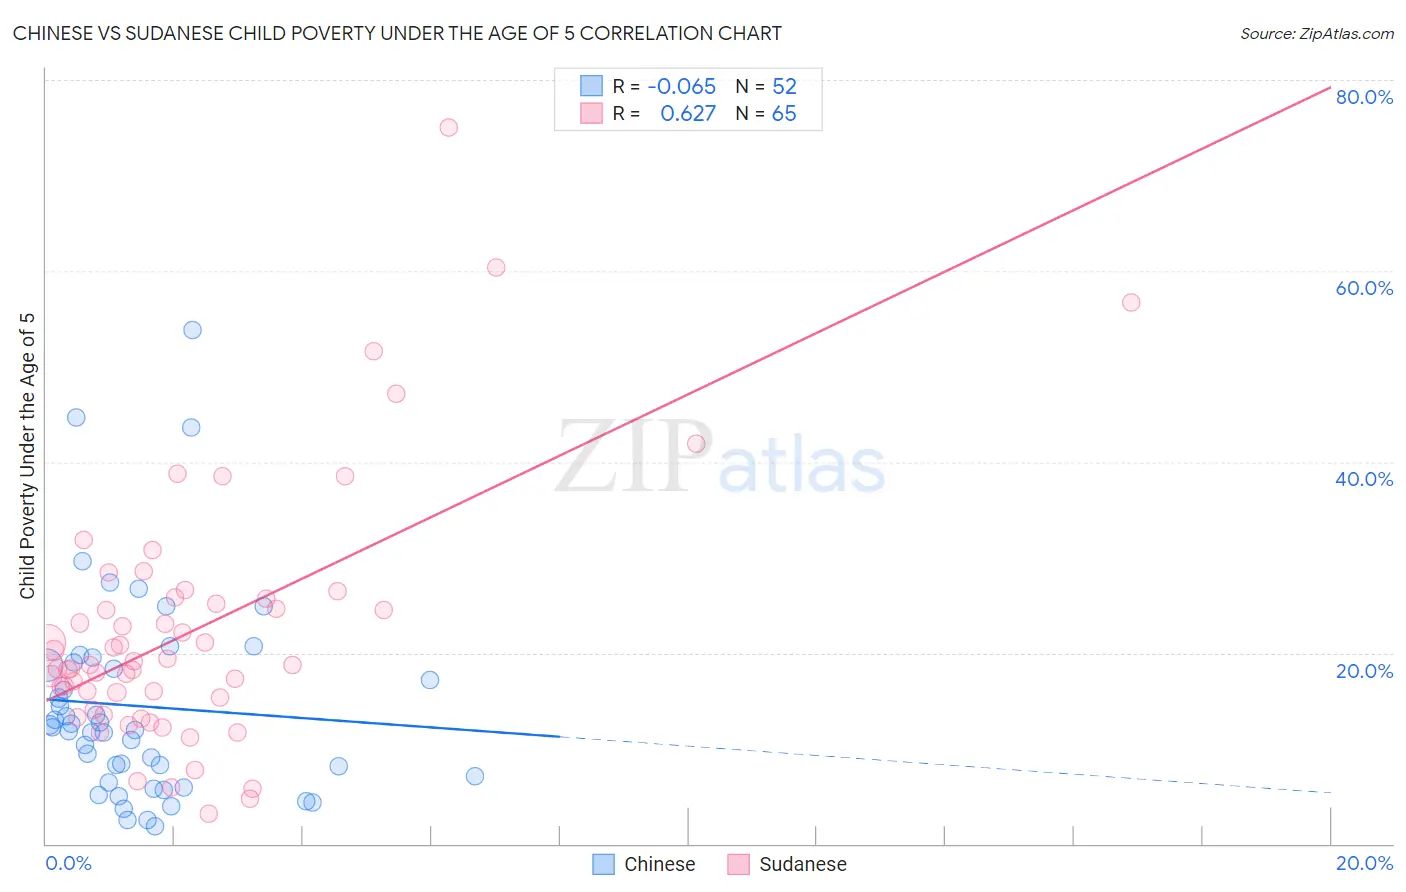 Chinese vs Sudanese Child Poverty Under the Age of 5